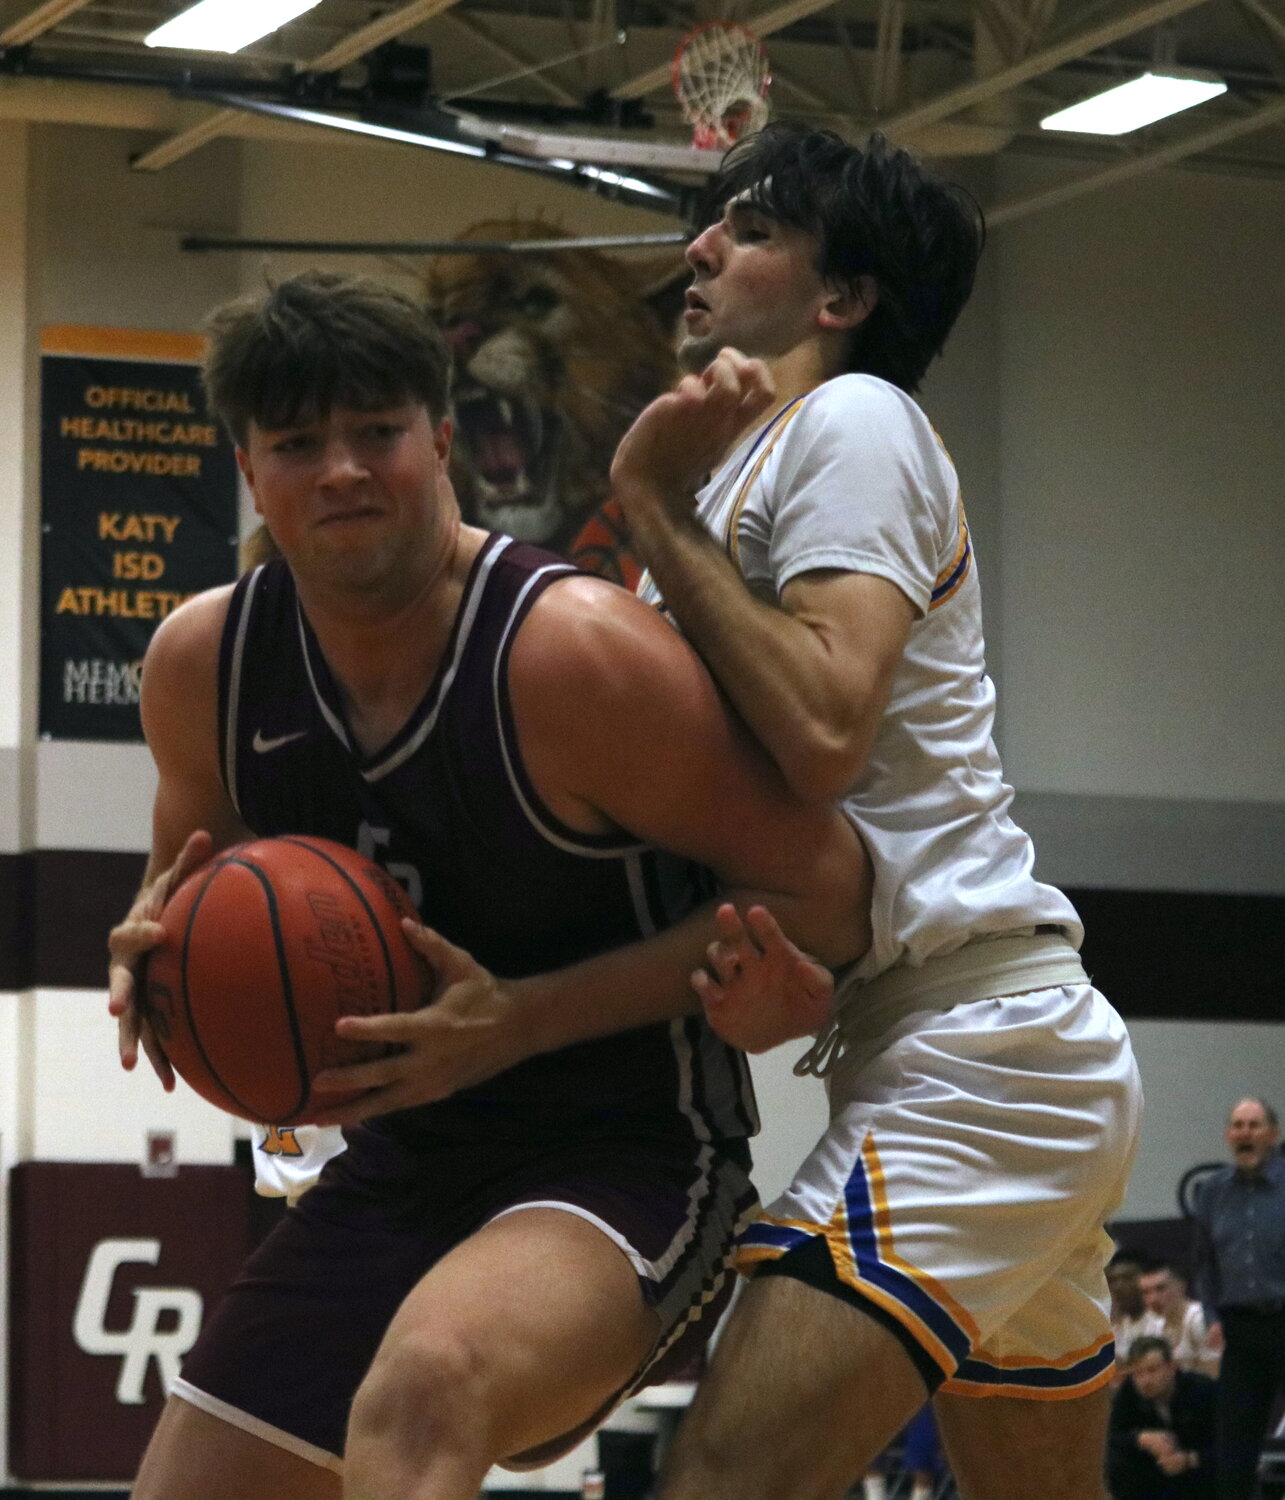 Kellen LeCronier fights through a defender during Friday's game between Cinco Ranch and Klein at the Cinco Ranch gym.